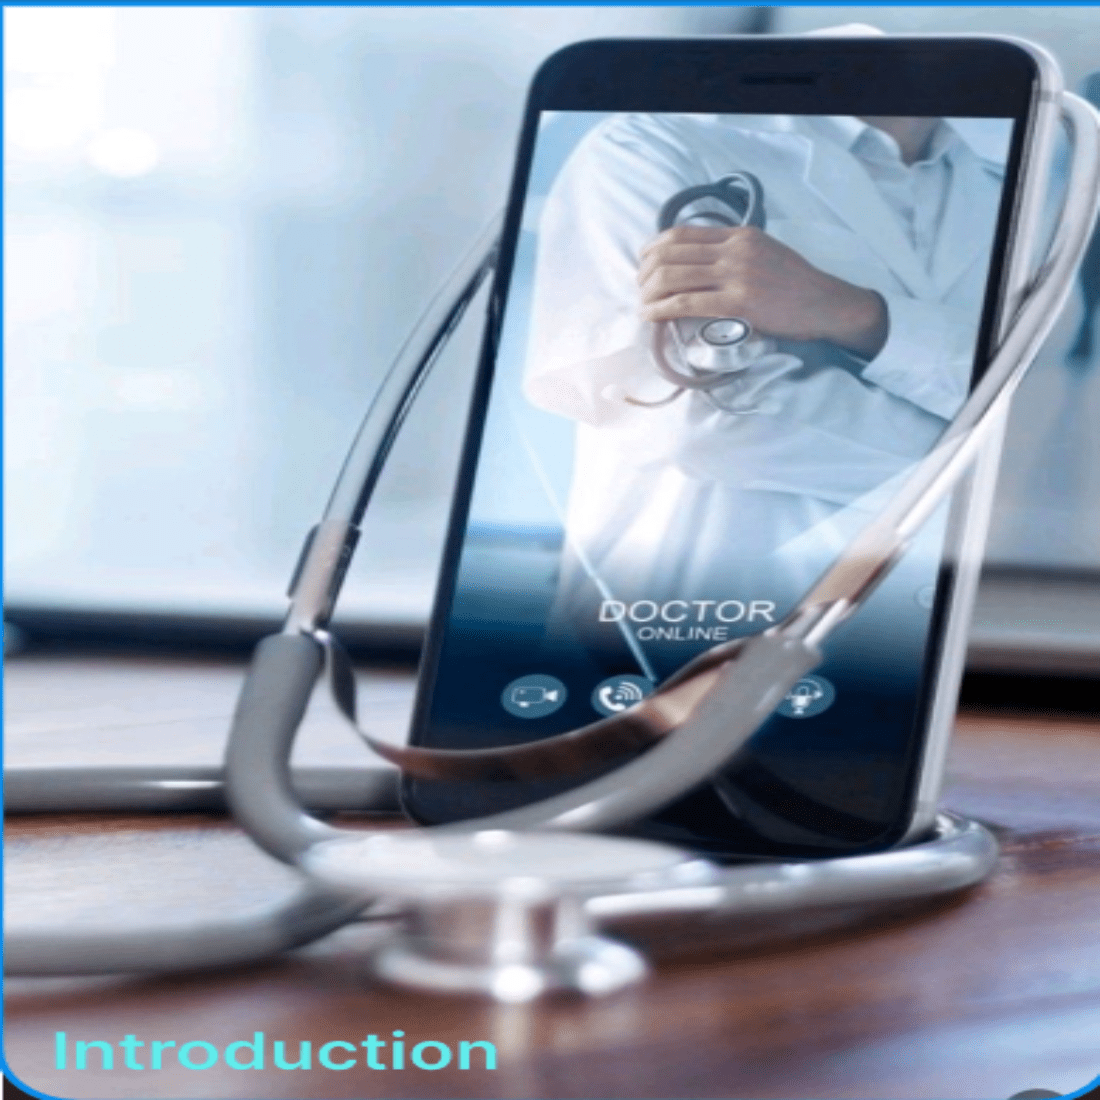 Doctor Video Call Banner cover image.